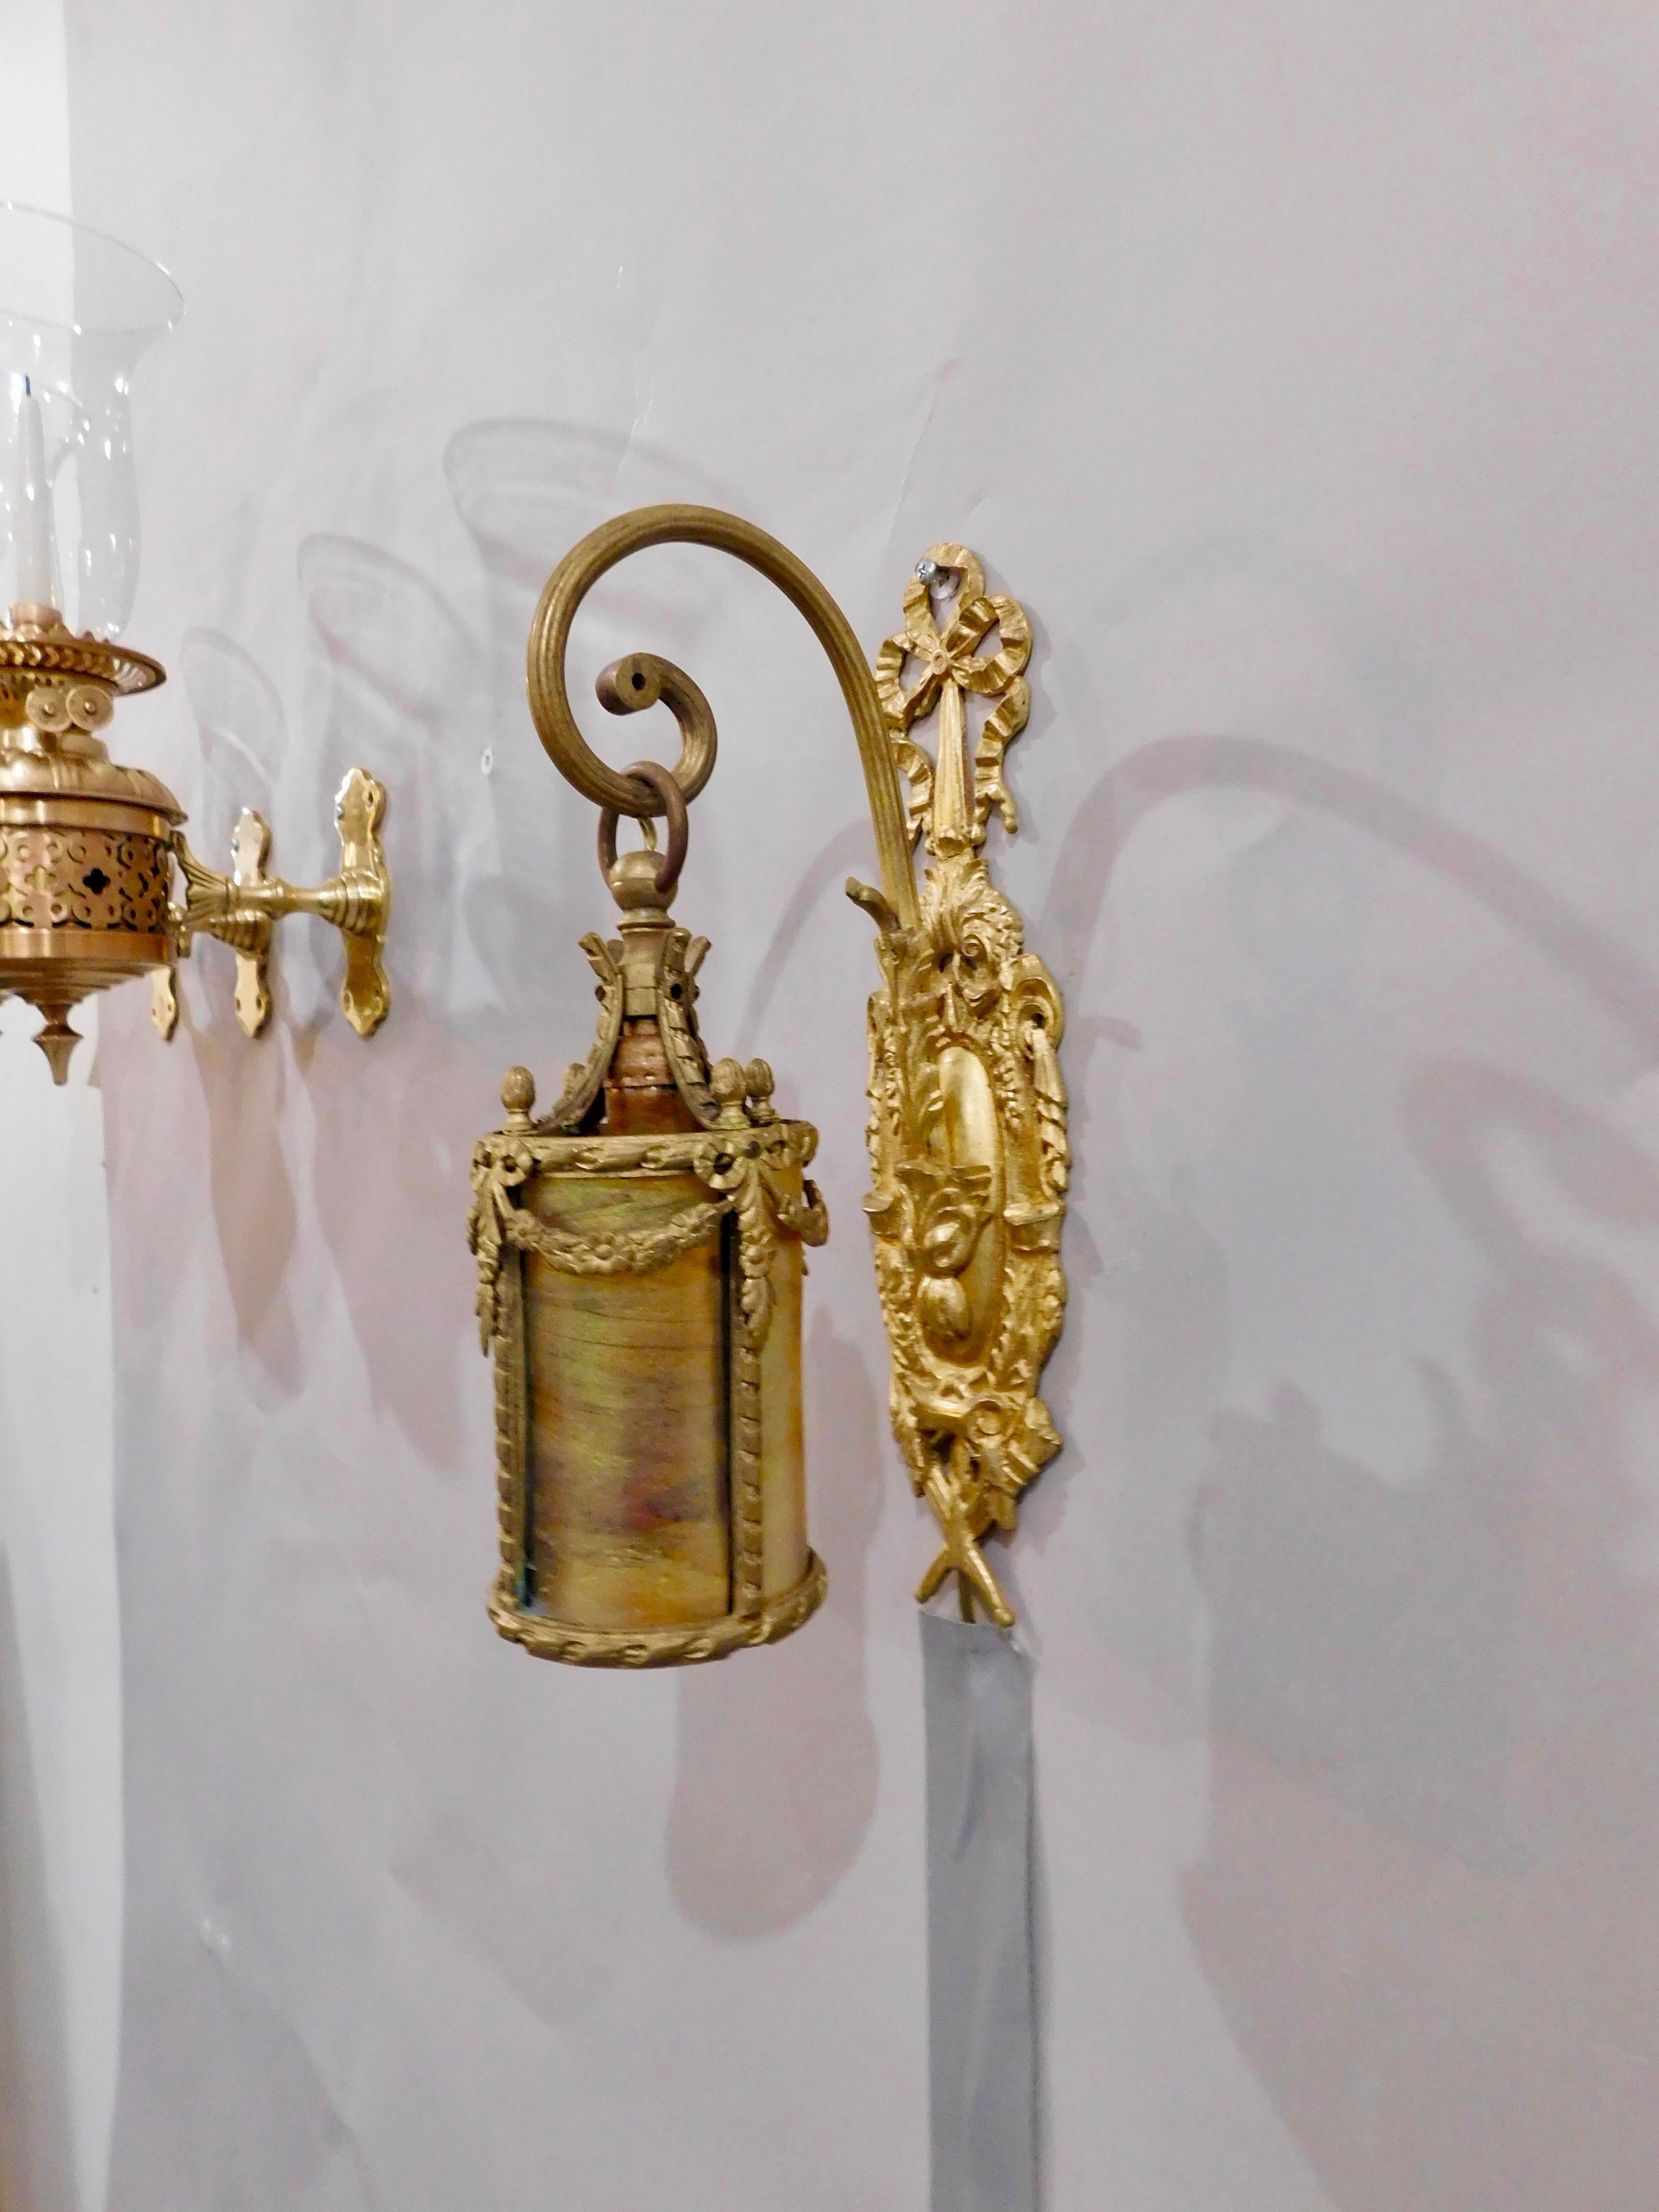 One-of-a-kind French Neoclassical Louis XVI style gilt bronze and brass sconce with Tiffany inspired tubular iridescent shade. Intricately detailed Neoclassical bow motif backplate, sprouting scrolled mount supporting Tiffany inspired tubular